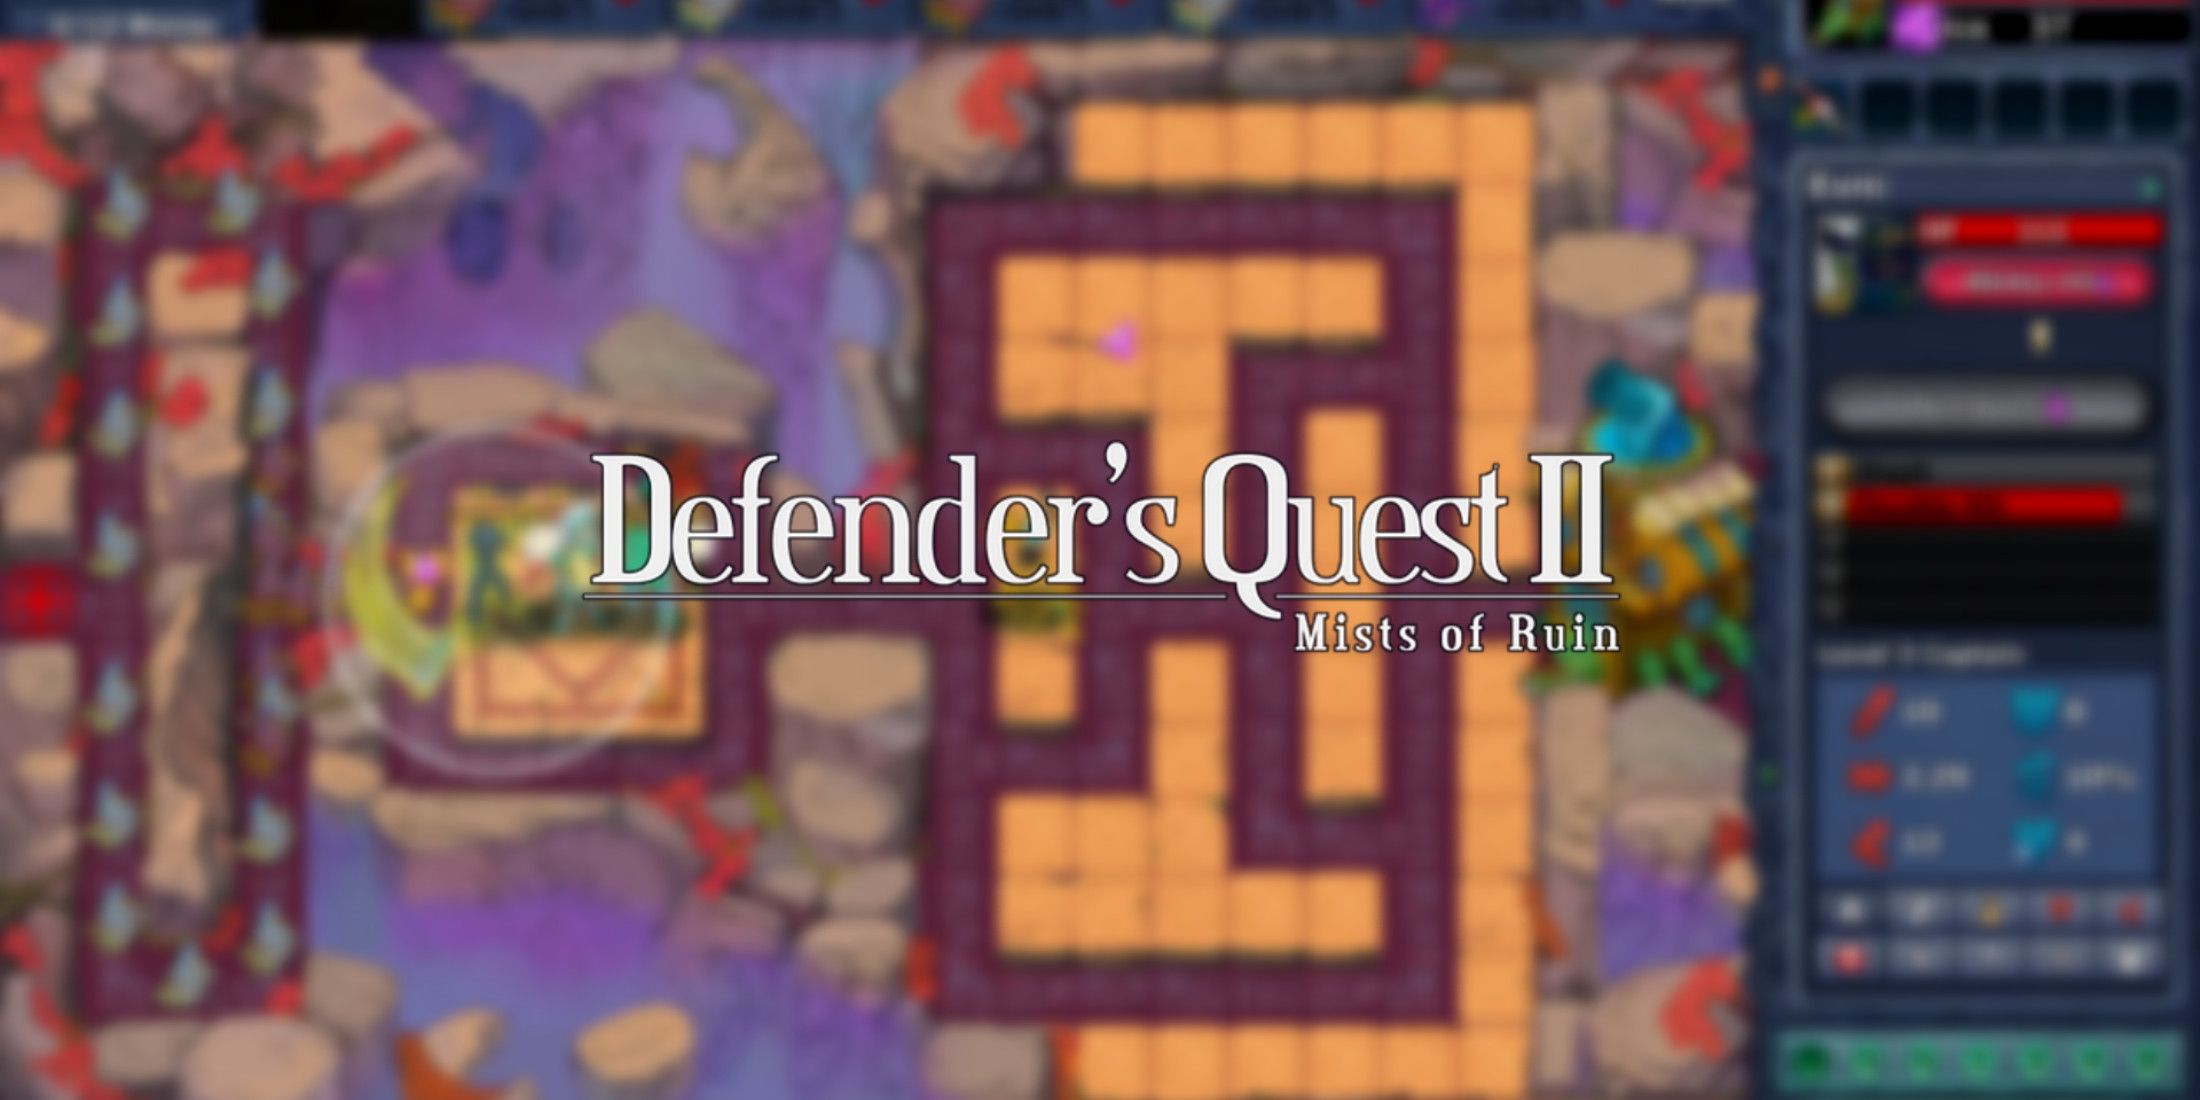 Defender's Quest 2 gameplay screenshot with logo